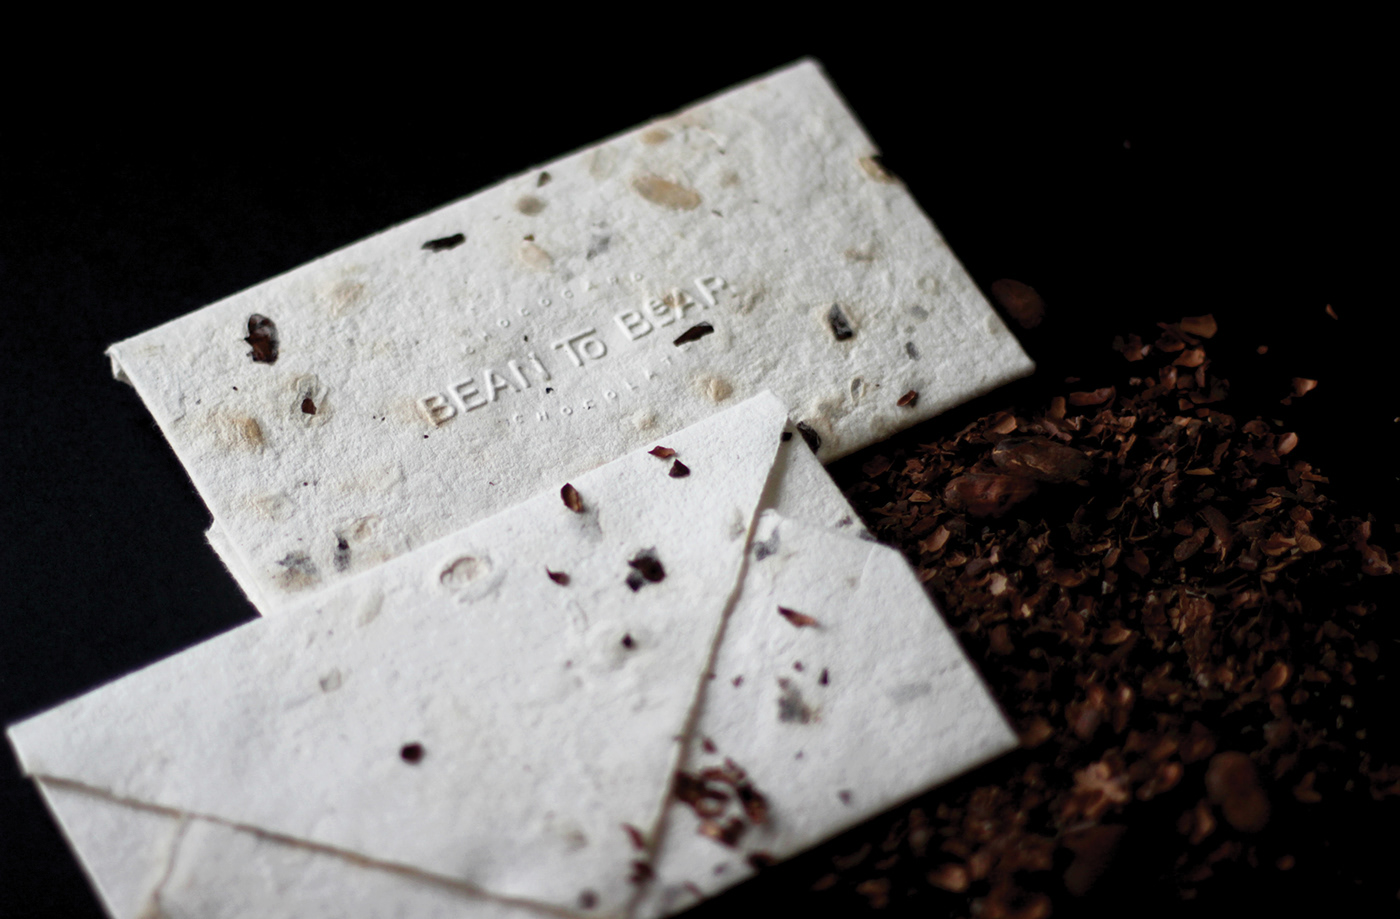 chocolate package moulded paper handcraft RECYCLED identity bean-to-bar environmentally friendly